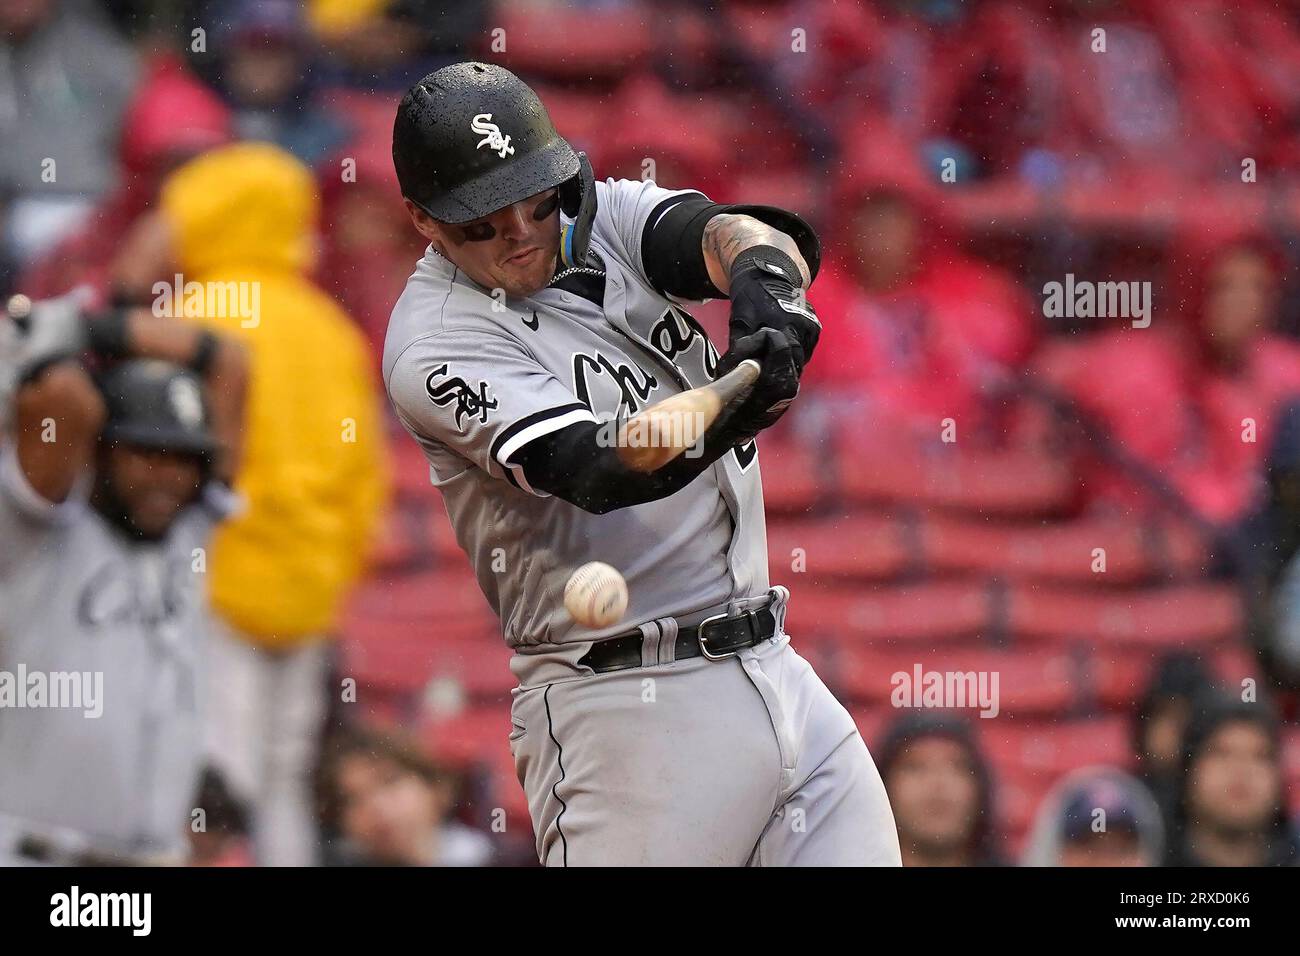 Chicago White Sox catcher Korey Lee swings at a pitch in the fifth